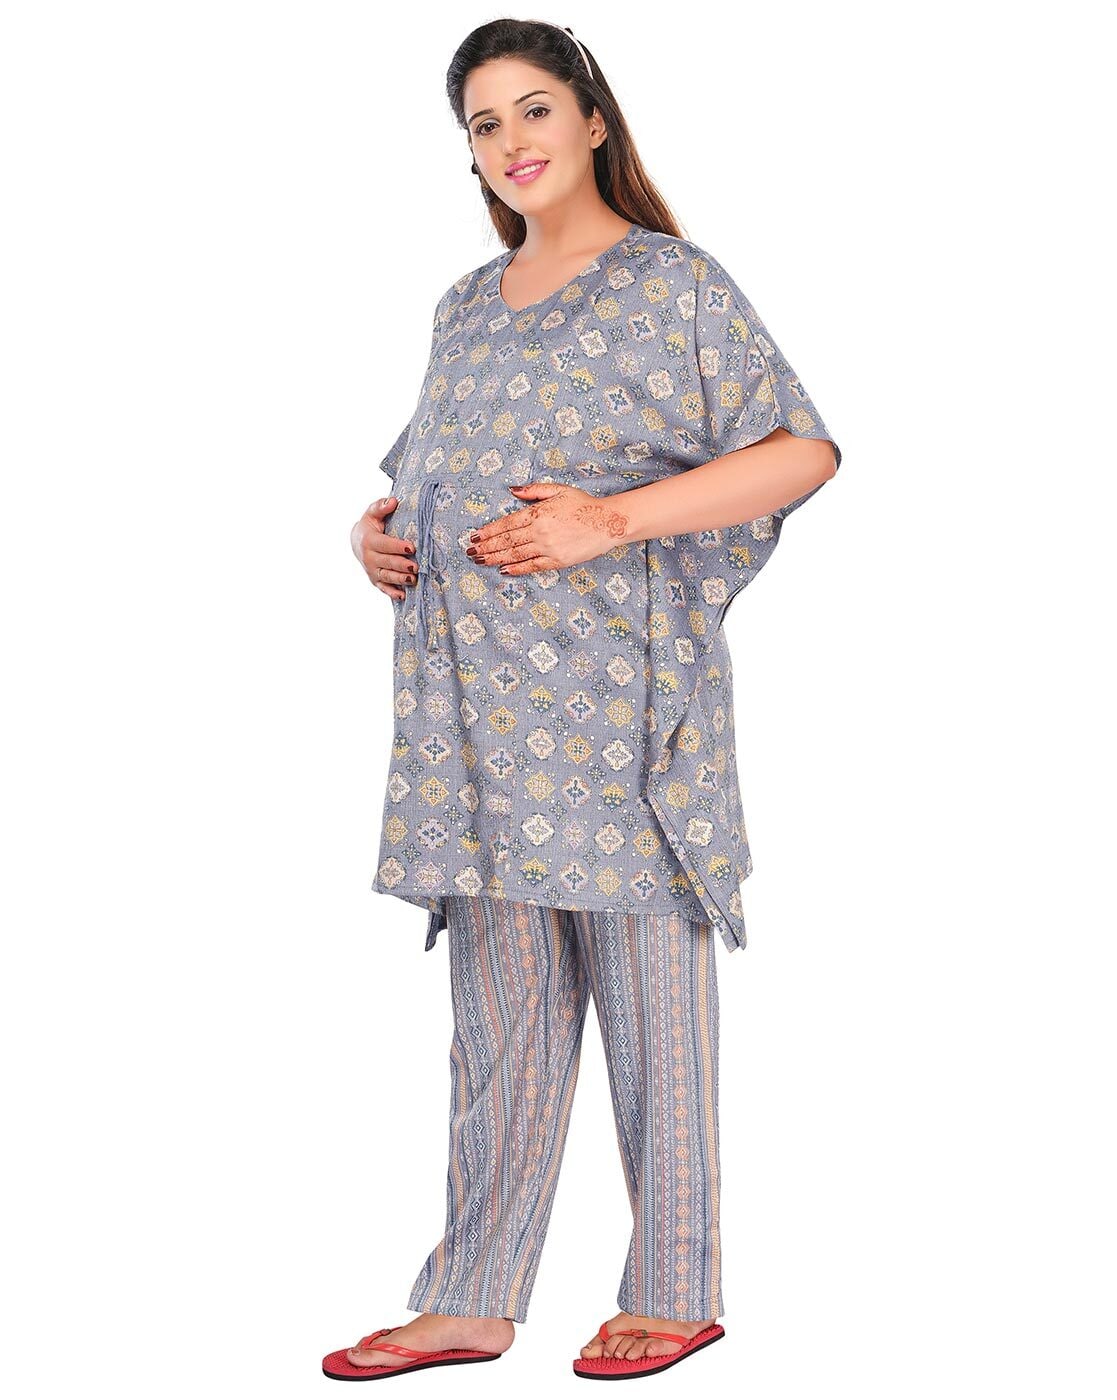 Maternity Night Gown in Pune - Dealers, Manufacturers & Suppliers - Justdial